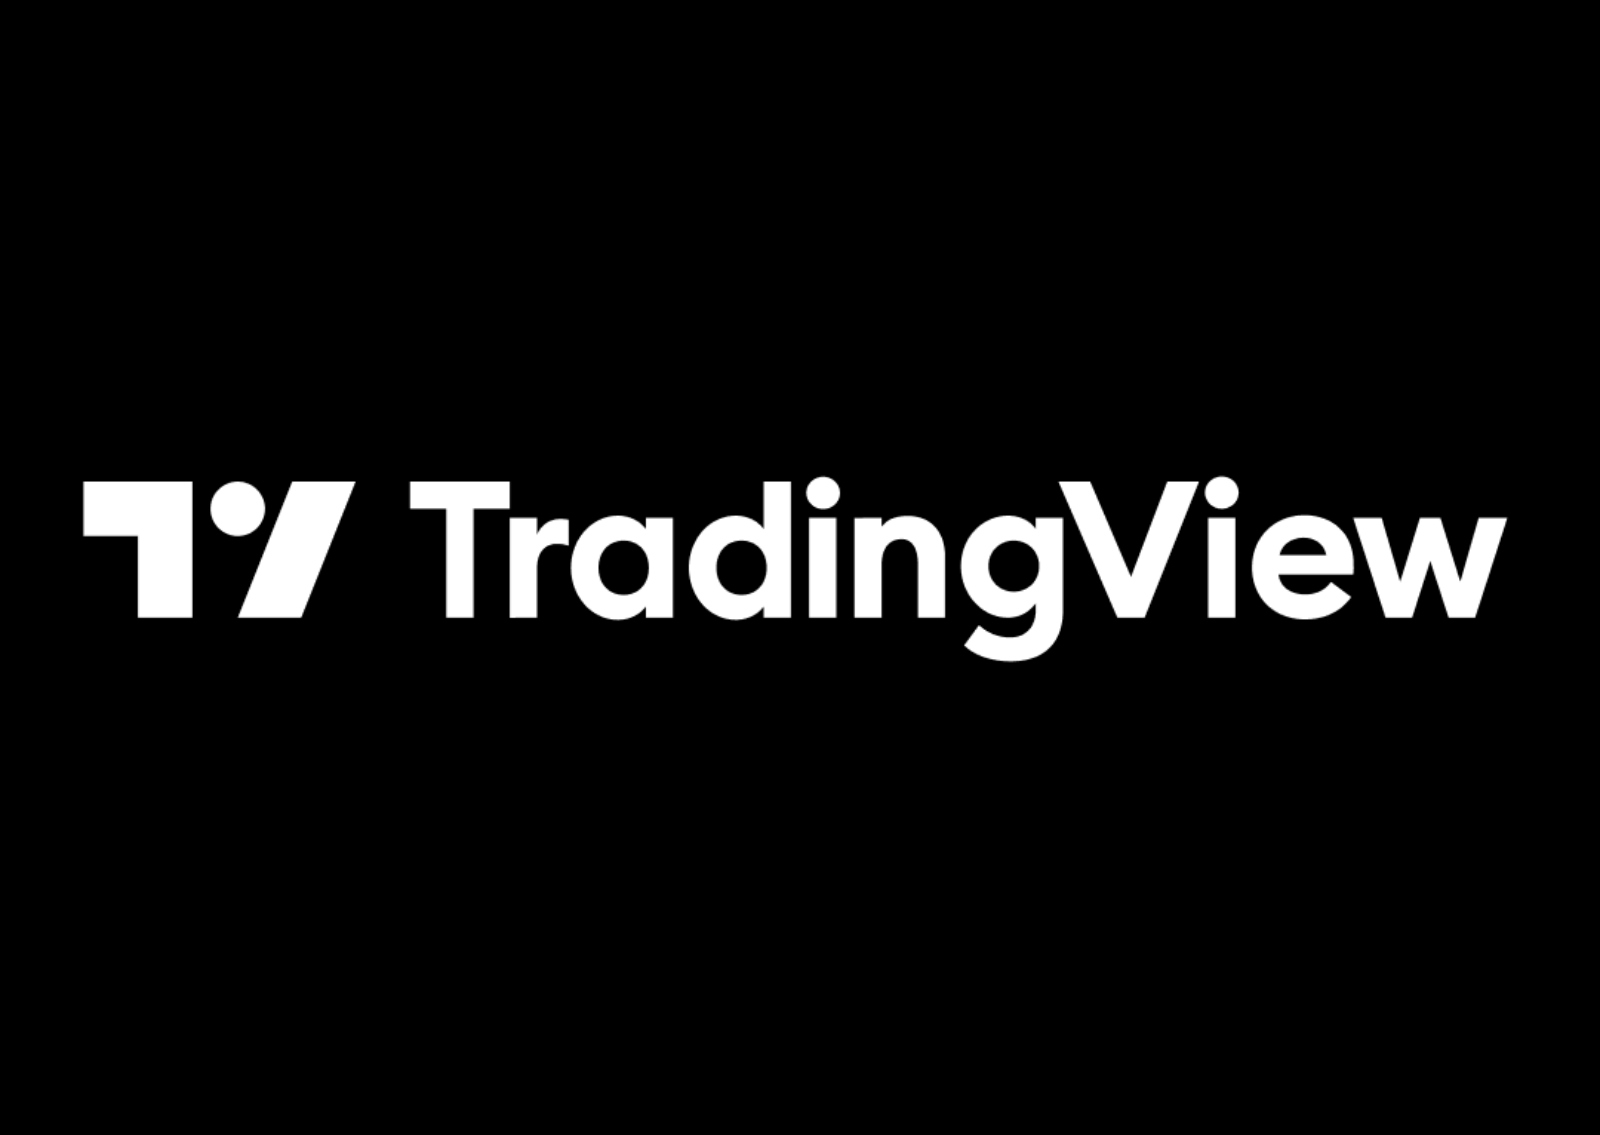 TradingView Explained and How to Use it